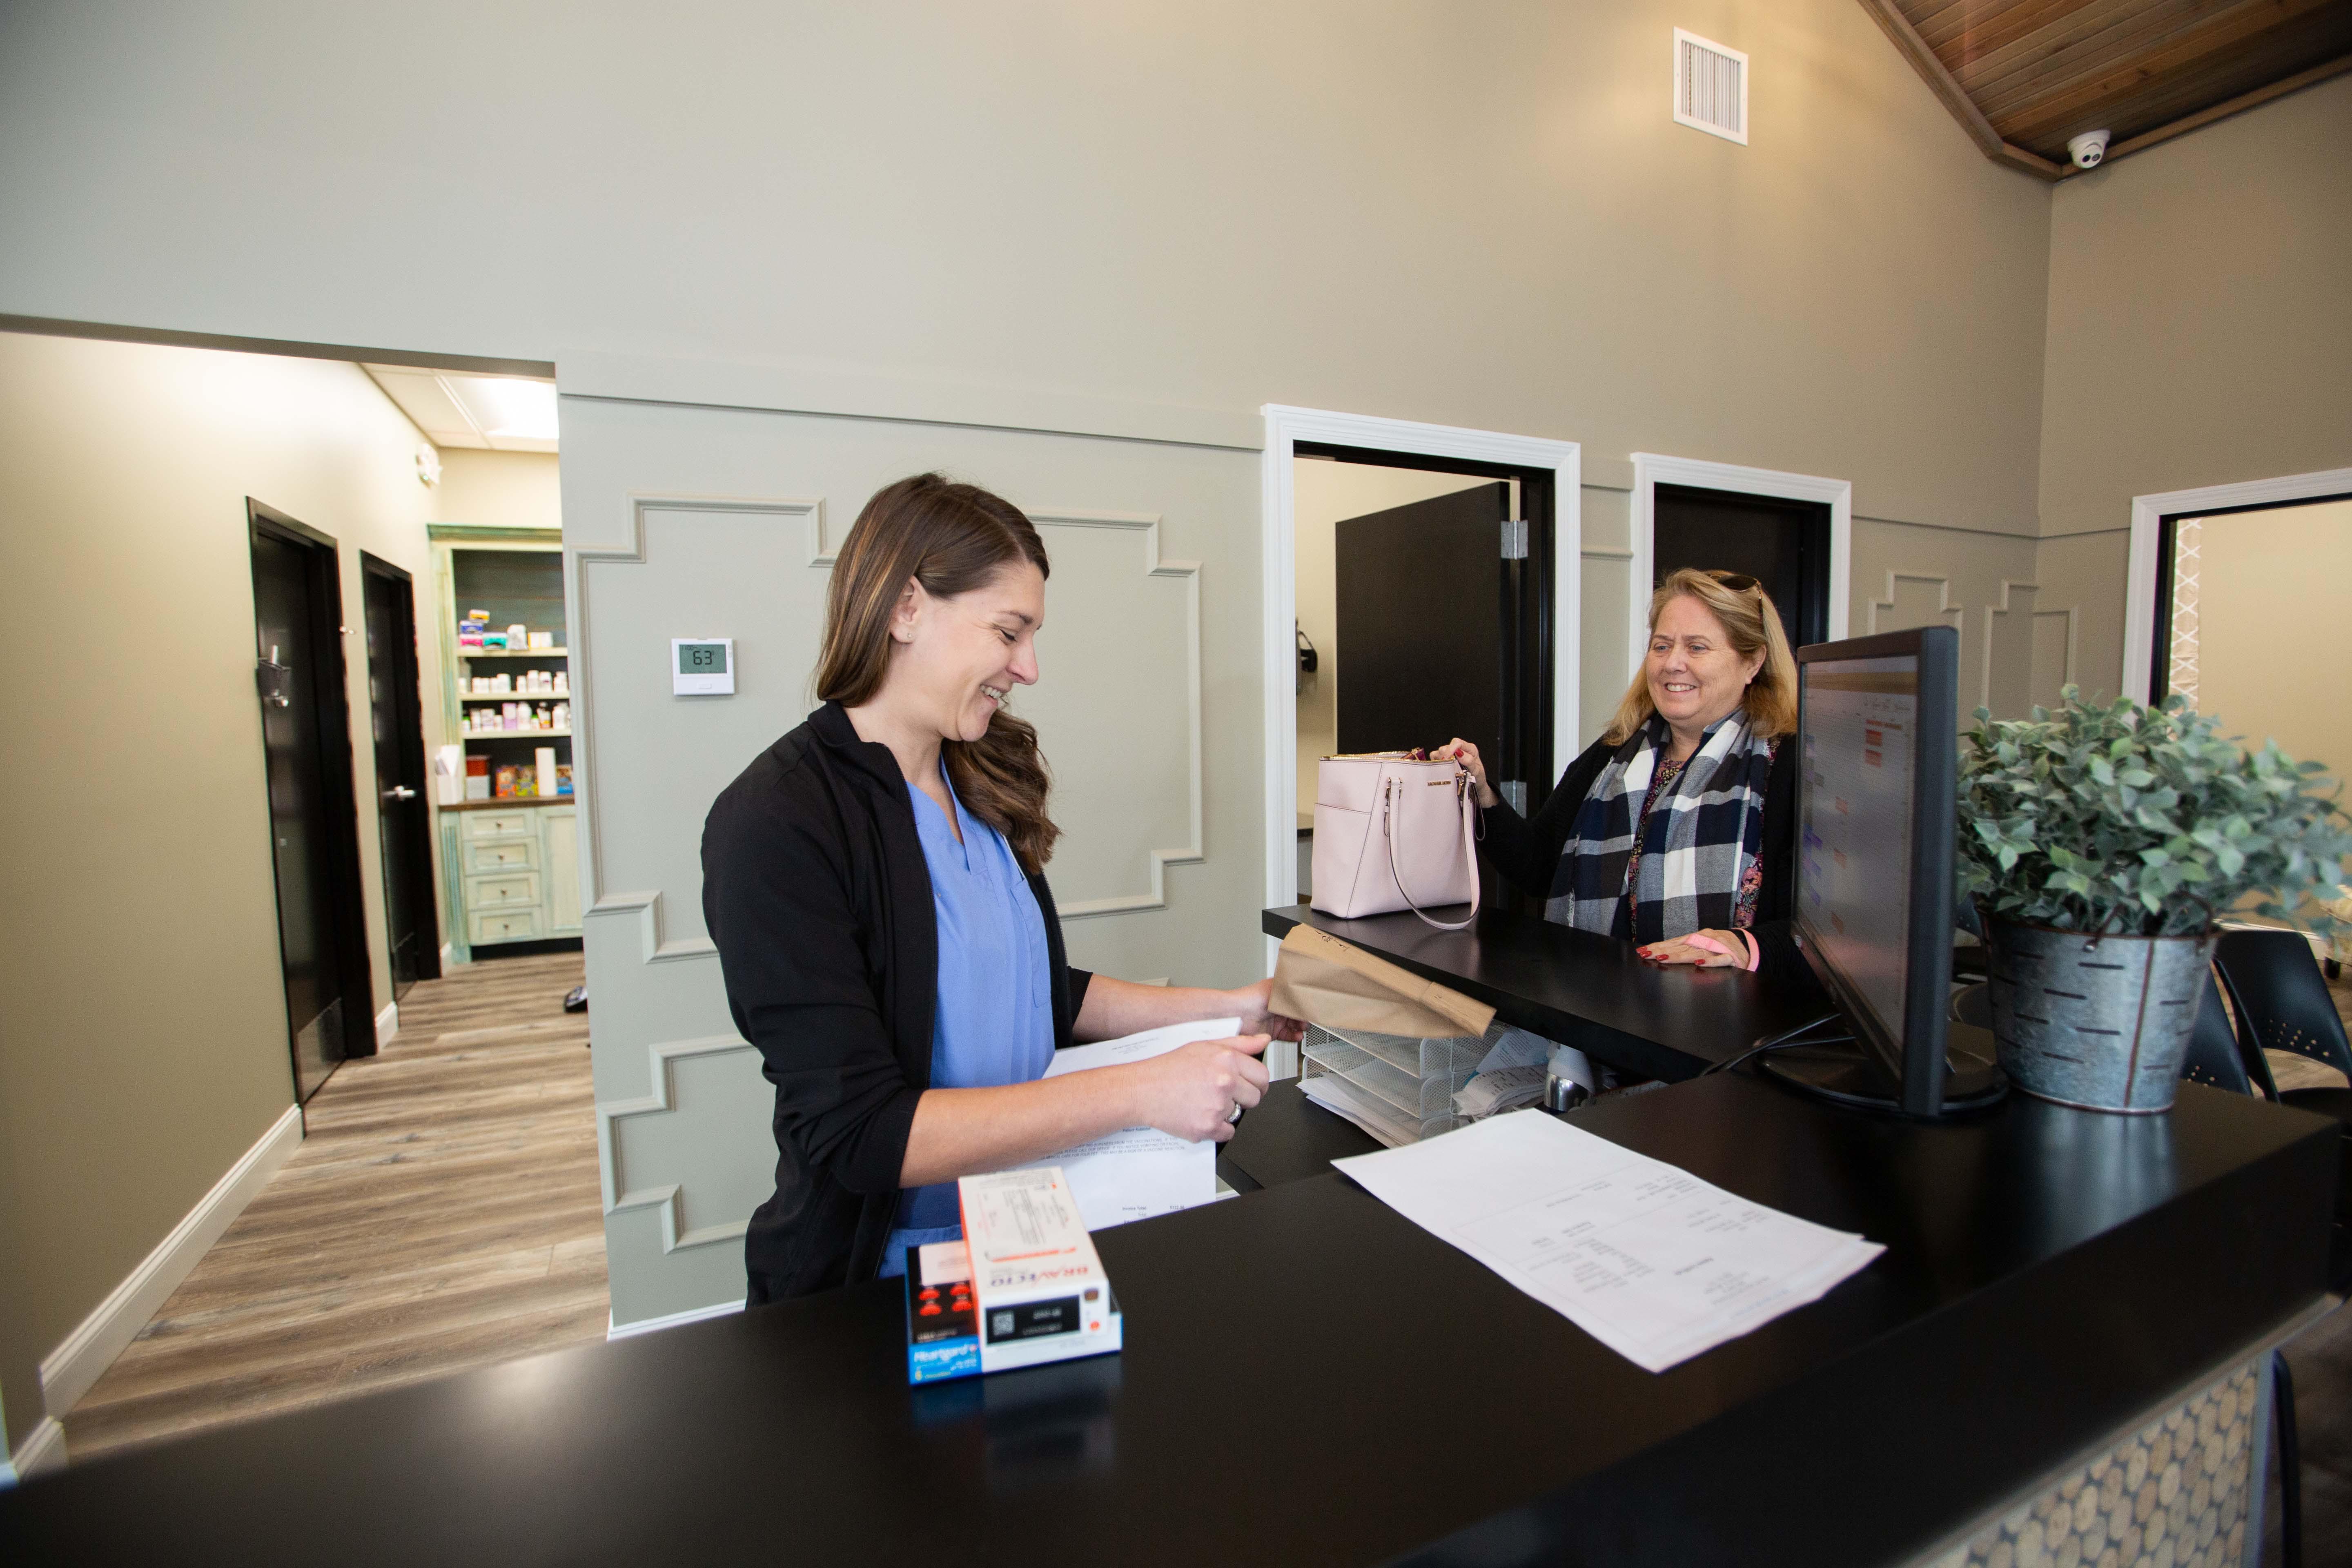 Our front office team is personable, welcoming, and always ready to assist clients.